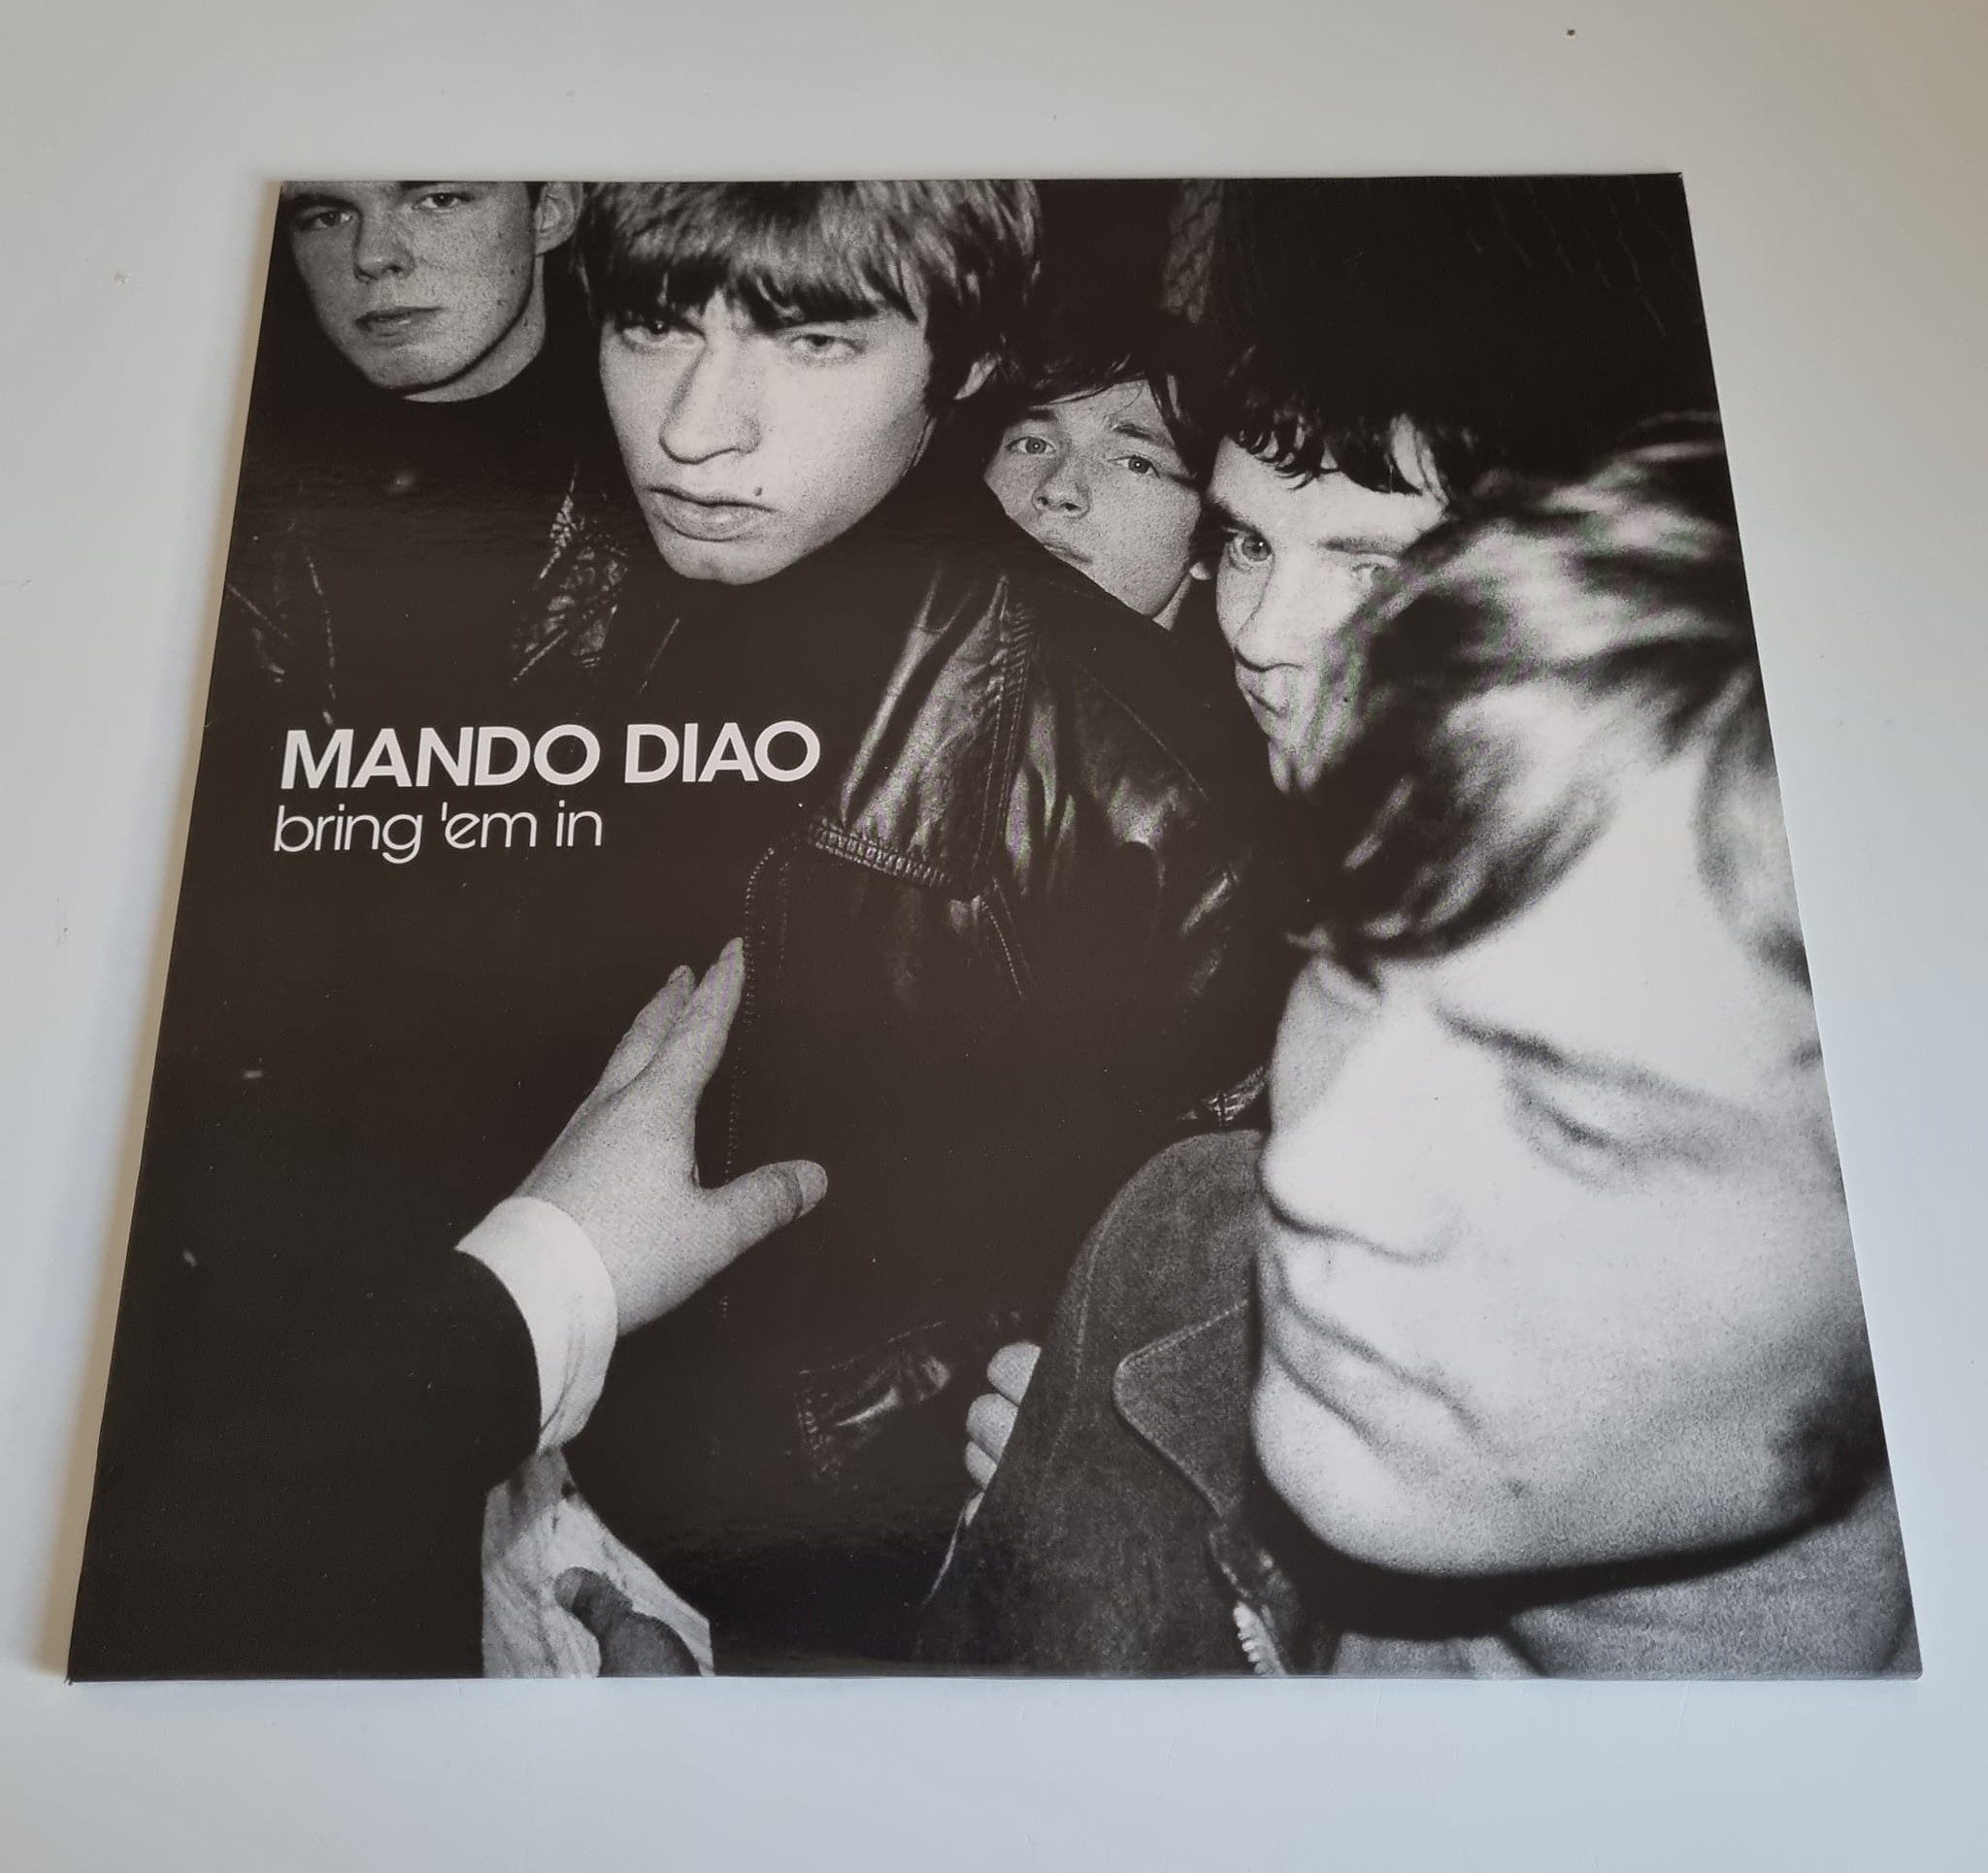 Buy this rare Mando Diao record by clicking here